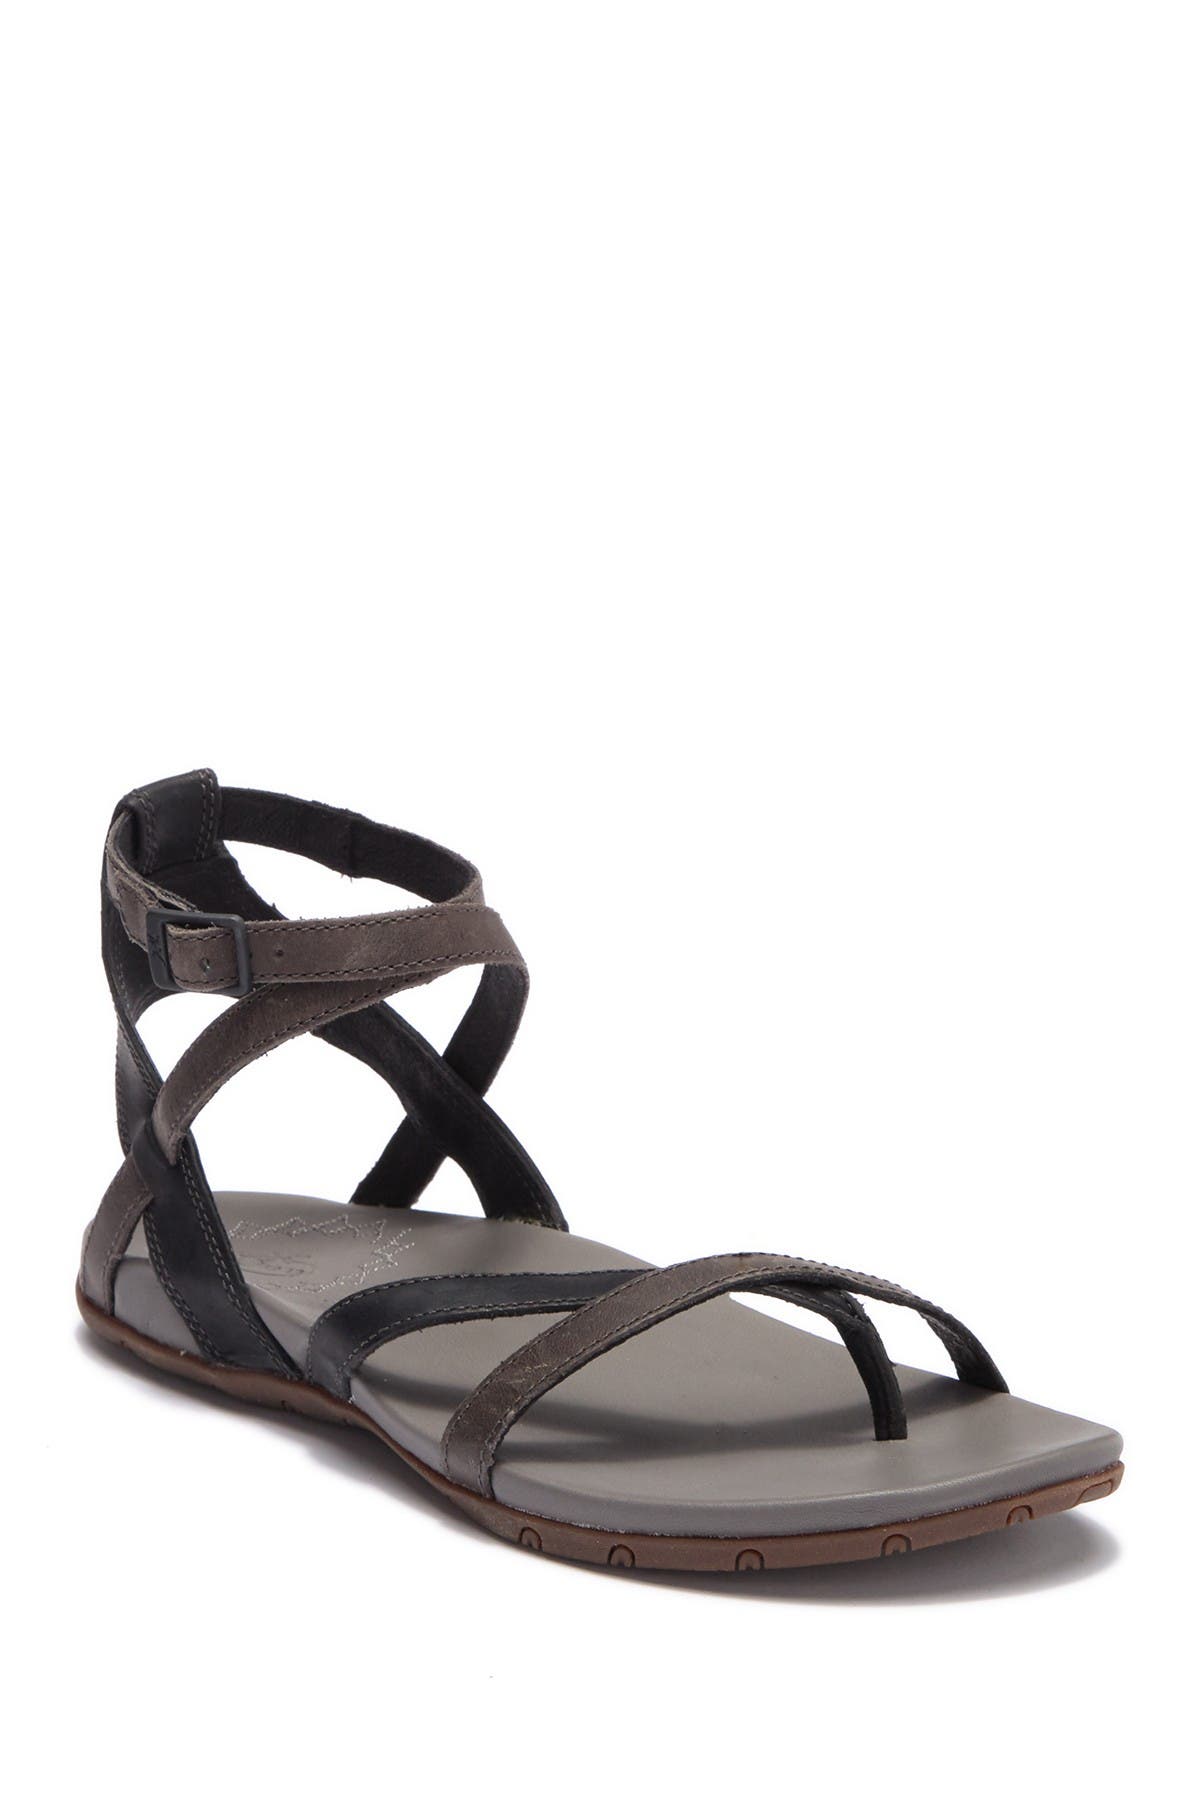 Chaco | Juniper Leather Sandal 